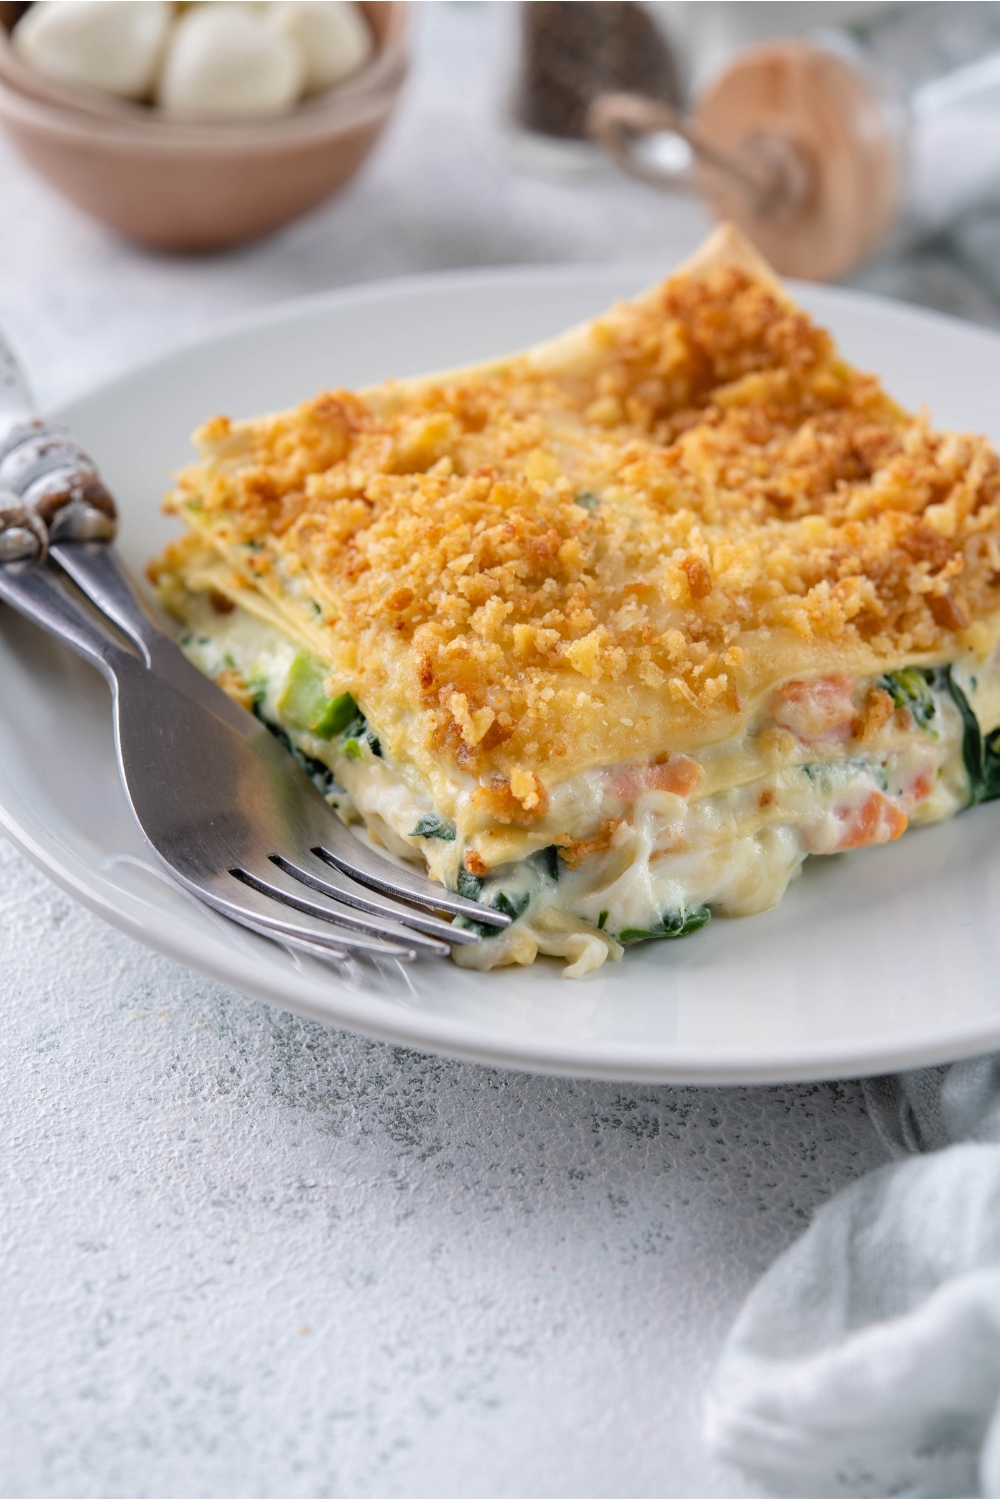 A serving of vegetable lasagna with cream sauce and a crispy cracker crumb topping on a plate with two forks.